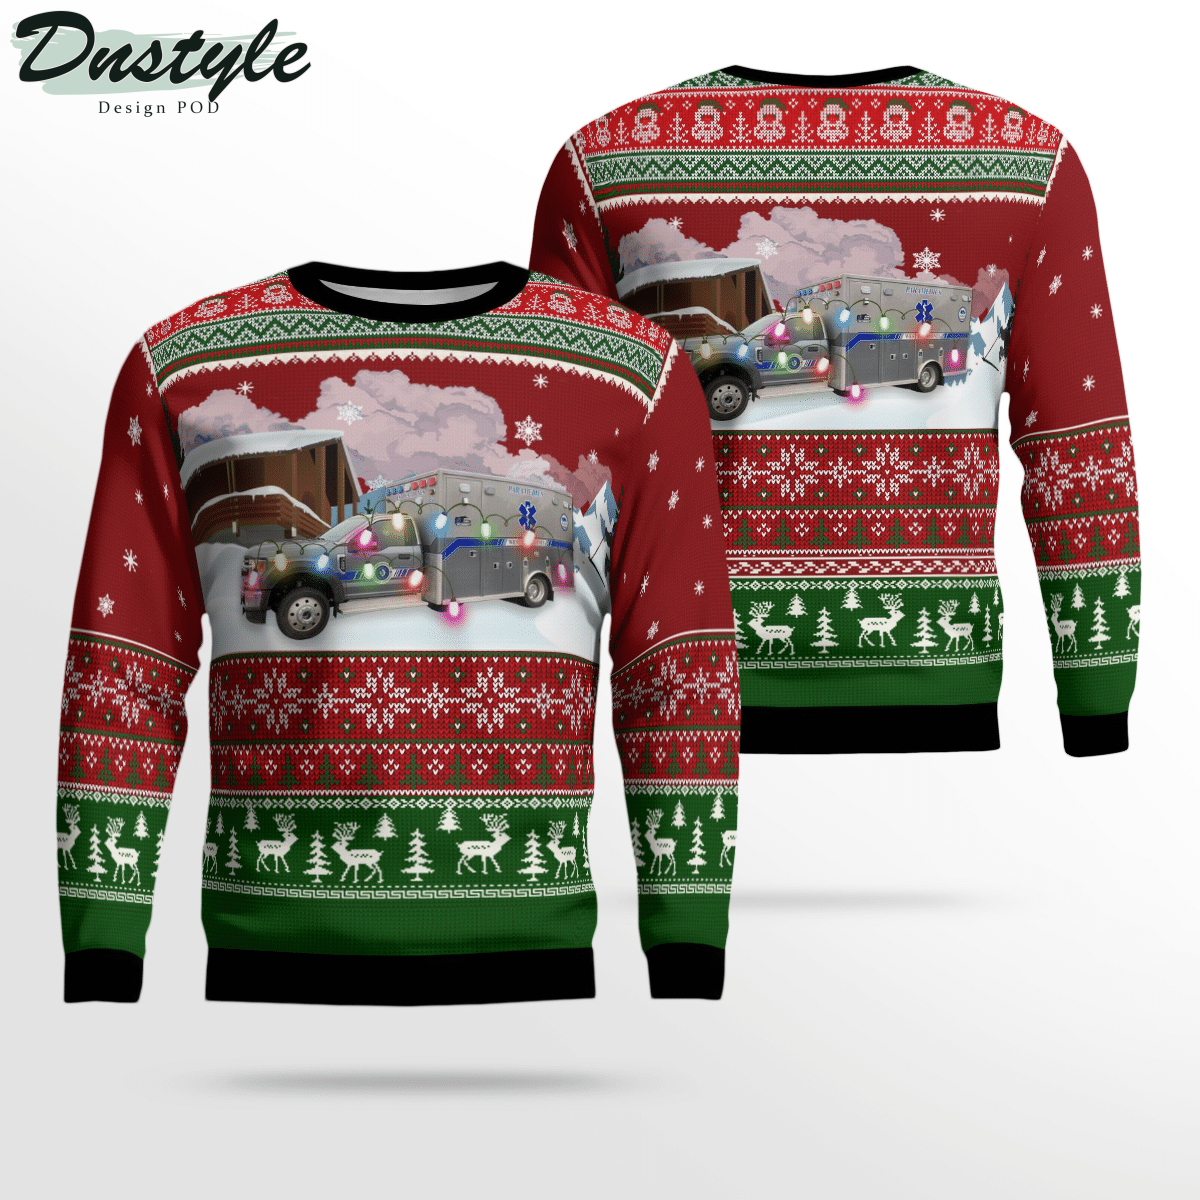 Iowa West Des Moines Emergency Medical Services Ugly Christmas Sweater